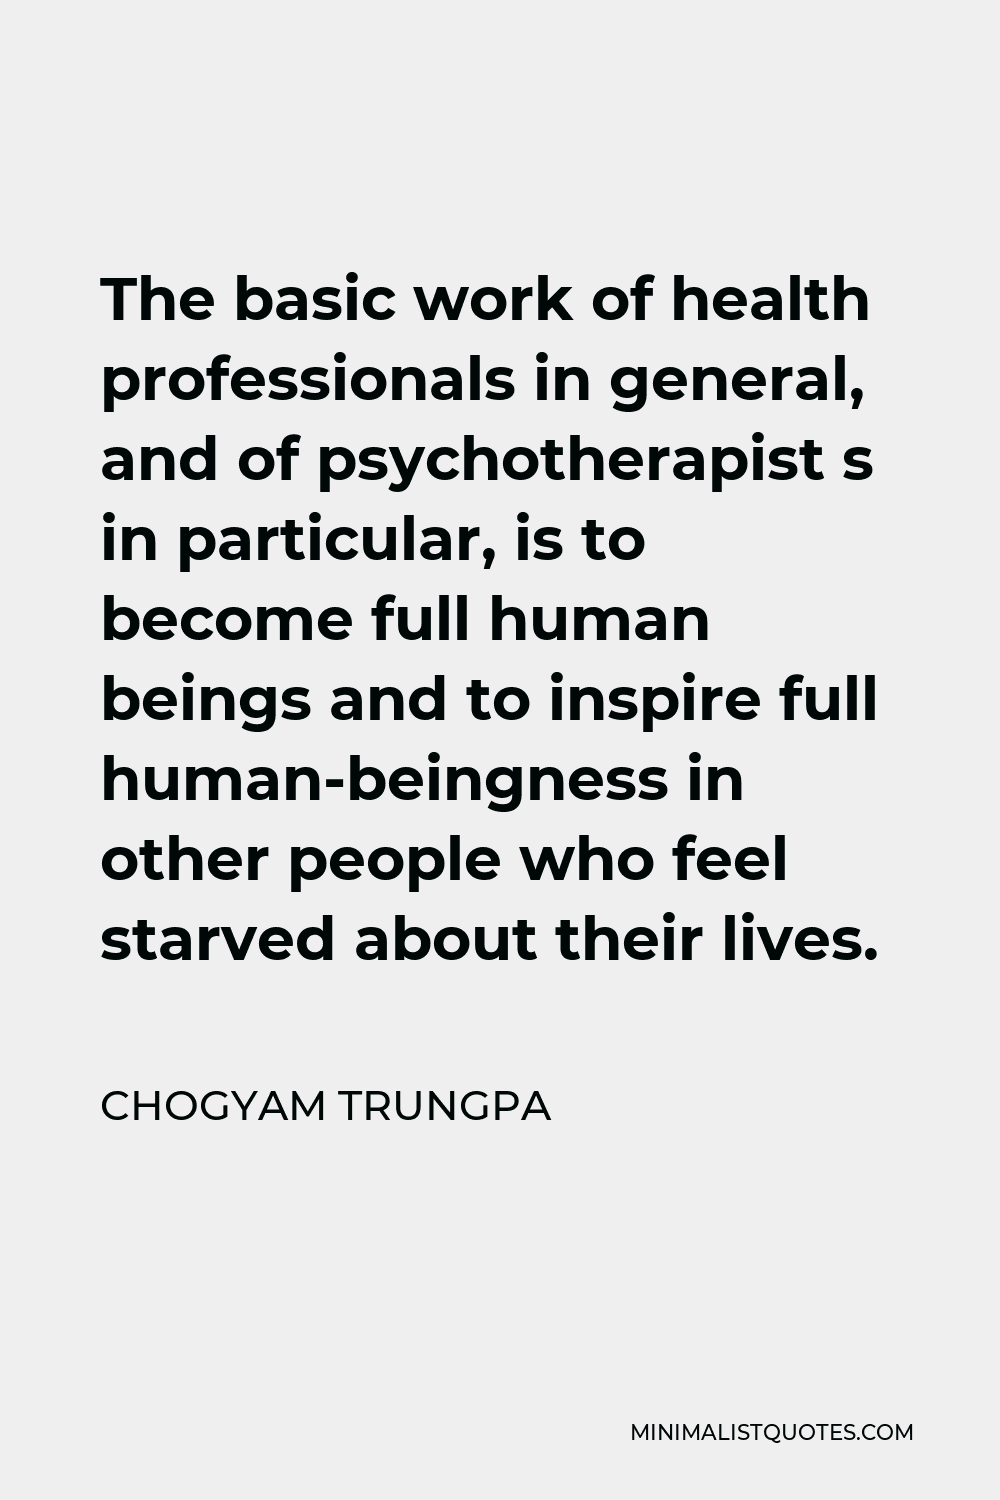 Chogyam Trungpa Quote - The basic work of health professionals in general, and of psychotherapist s in particular, is to become full human beings and to inspire full human-beingness in other people who feel starved about their lives.